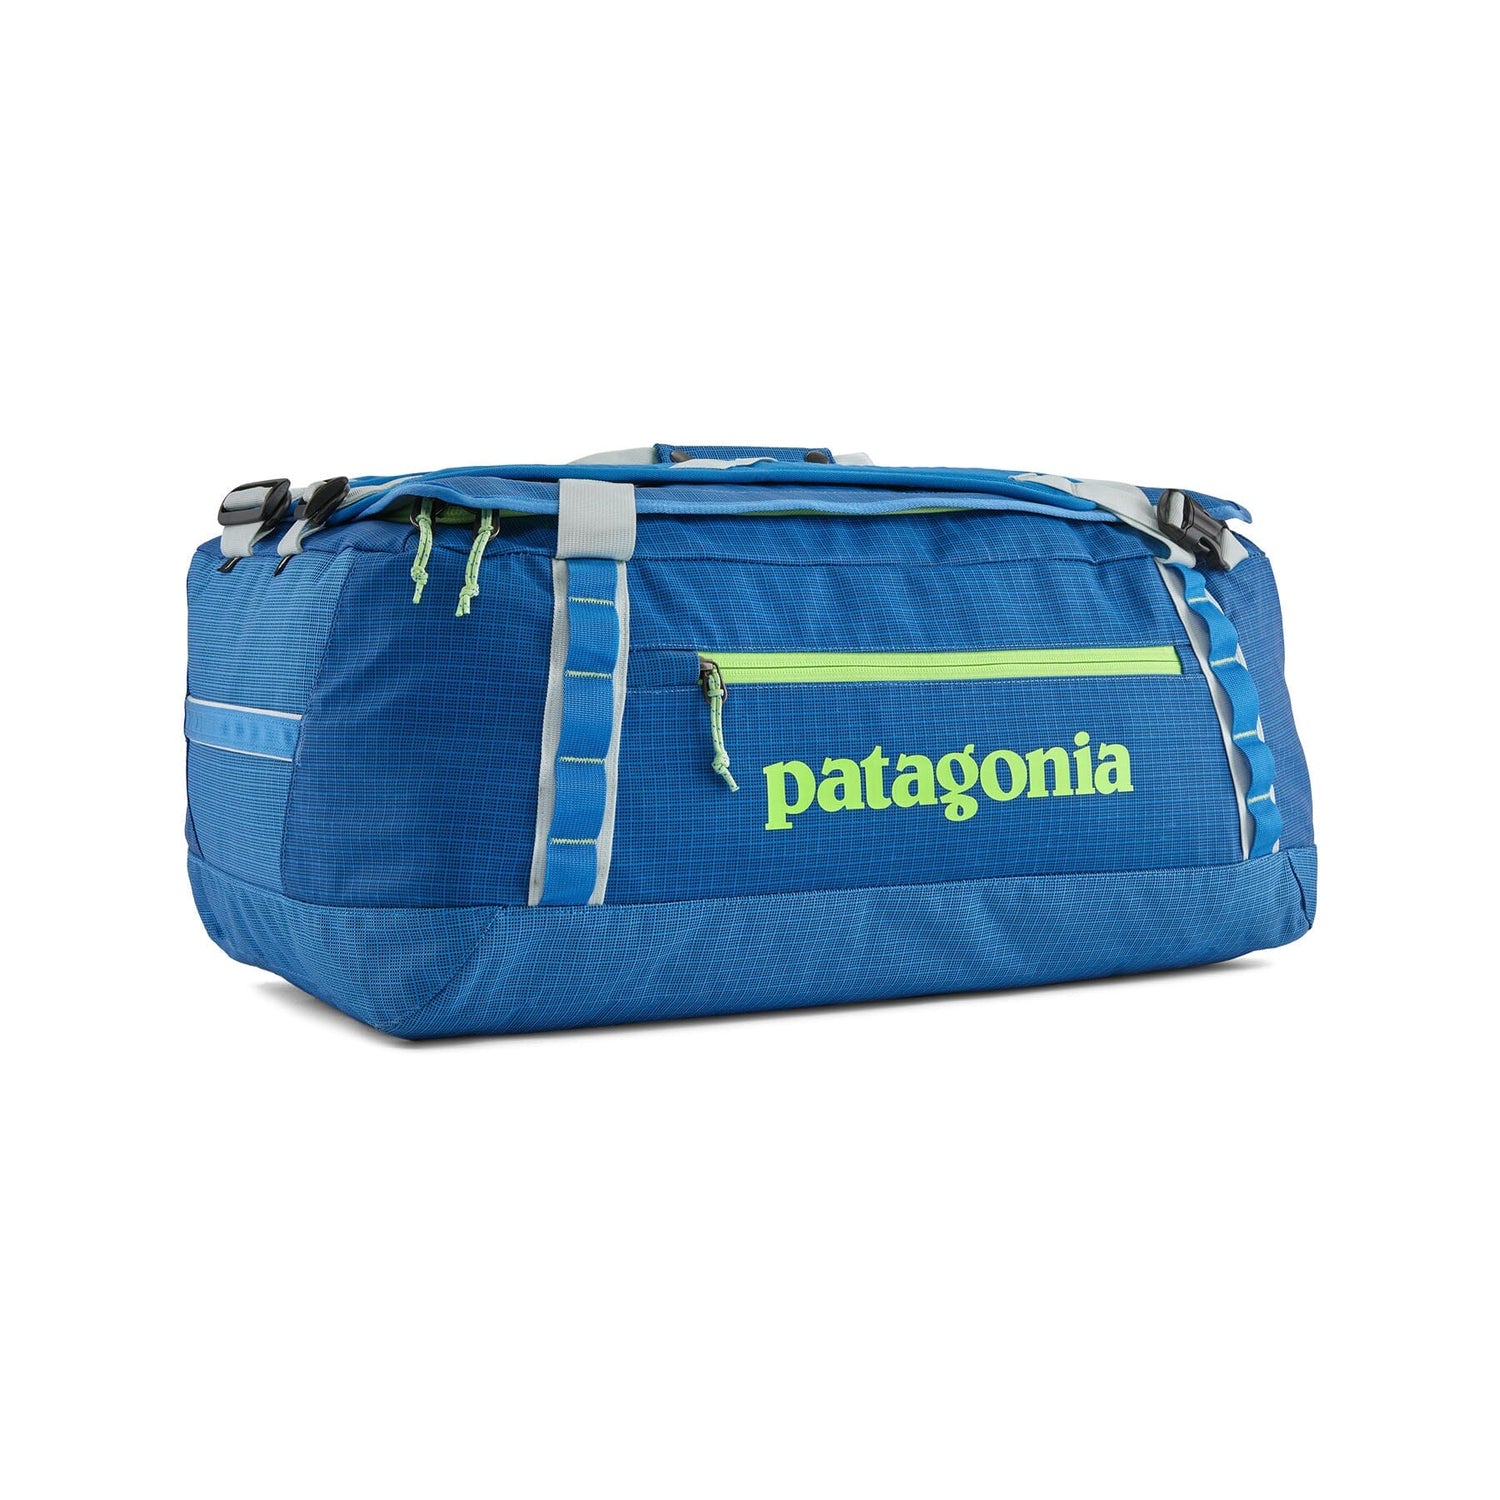 Patagonia - Black Hole Duffel 55L - 100% postconsumer recycled polyester - Weekendbee - sustainable sportswear